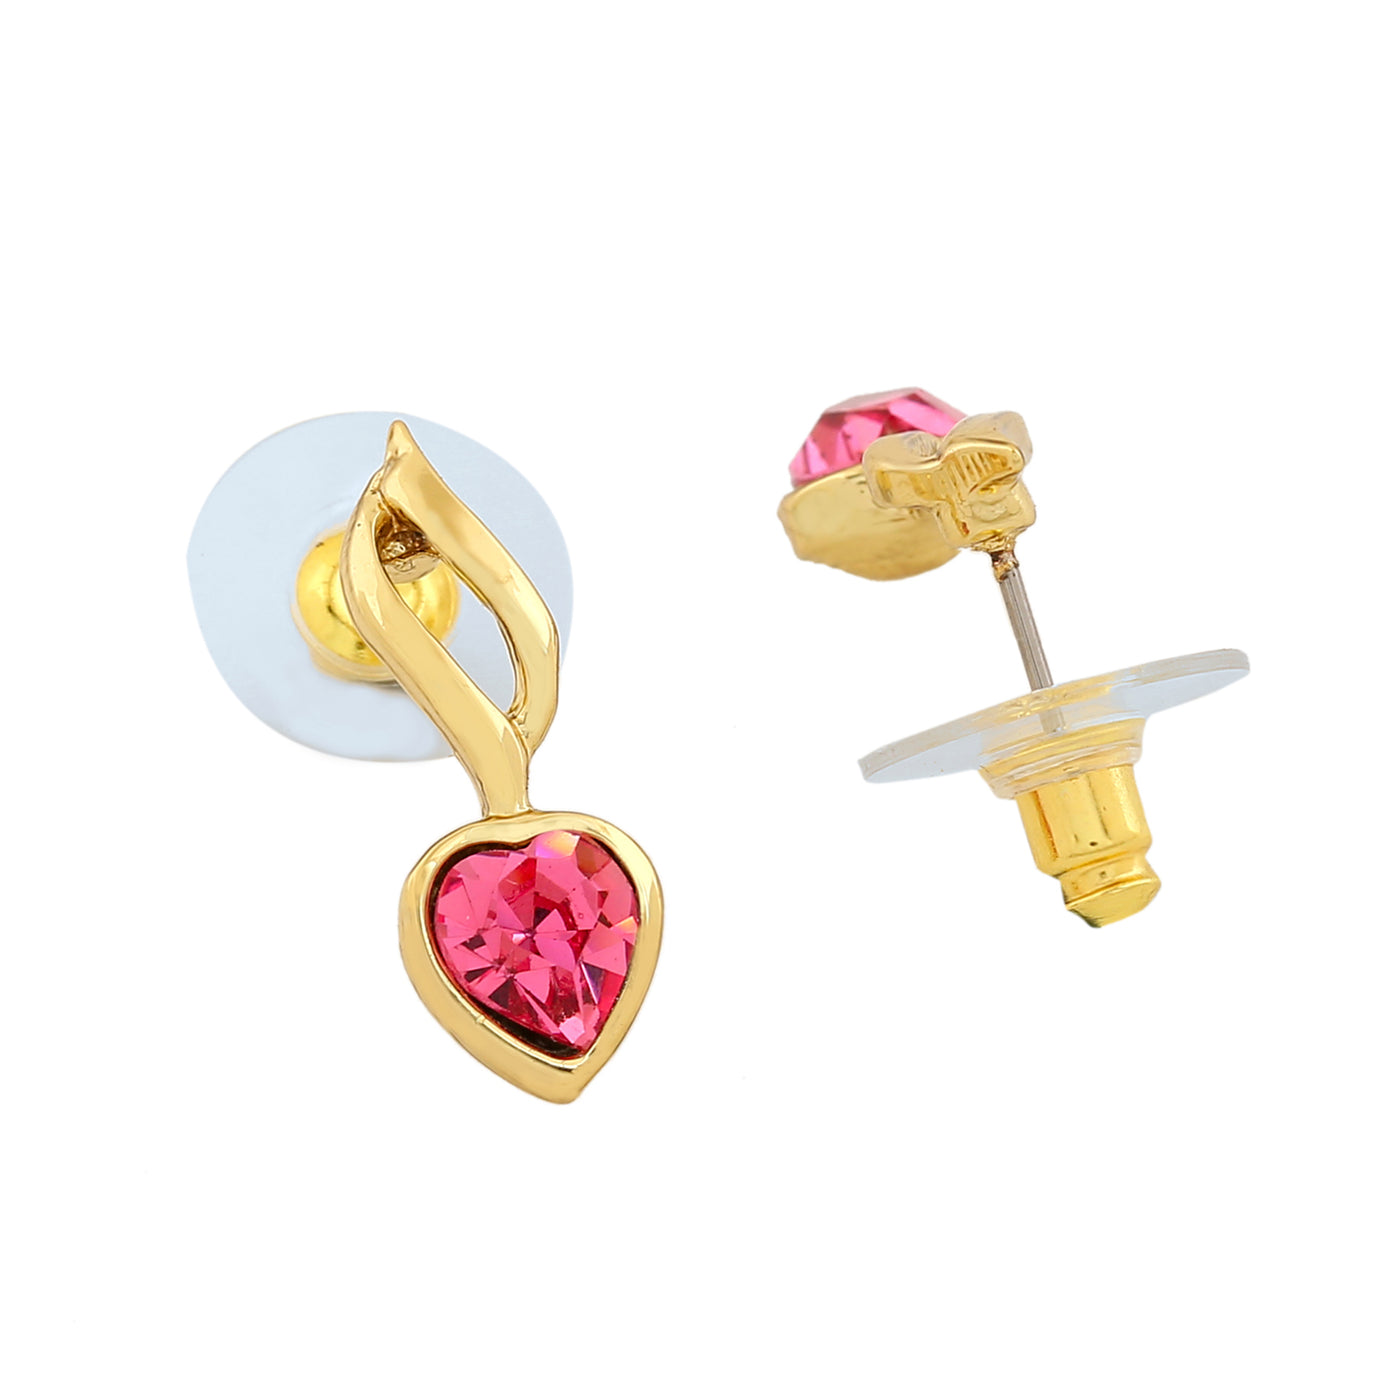 Estele Gold Plated Heart Shaped Earrings with Pink Crystal for Women